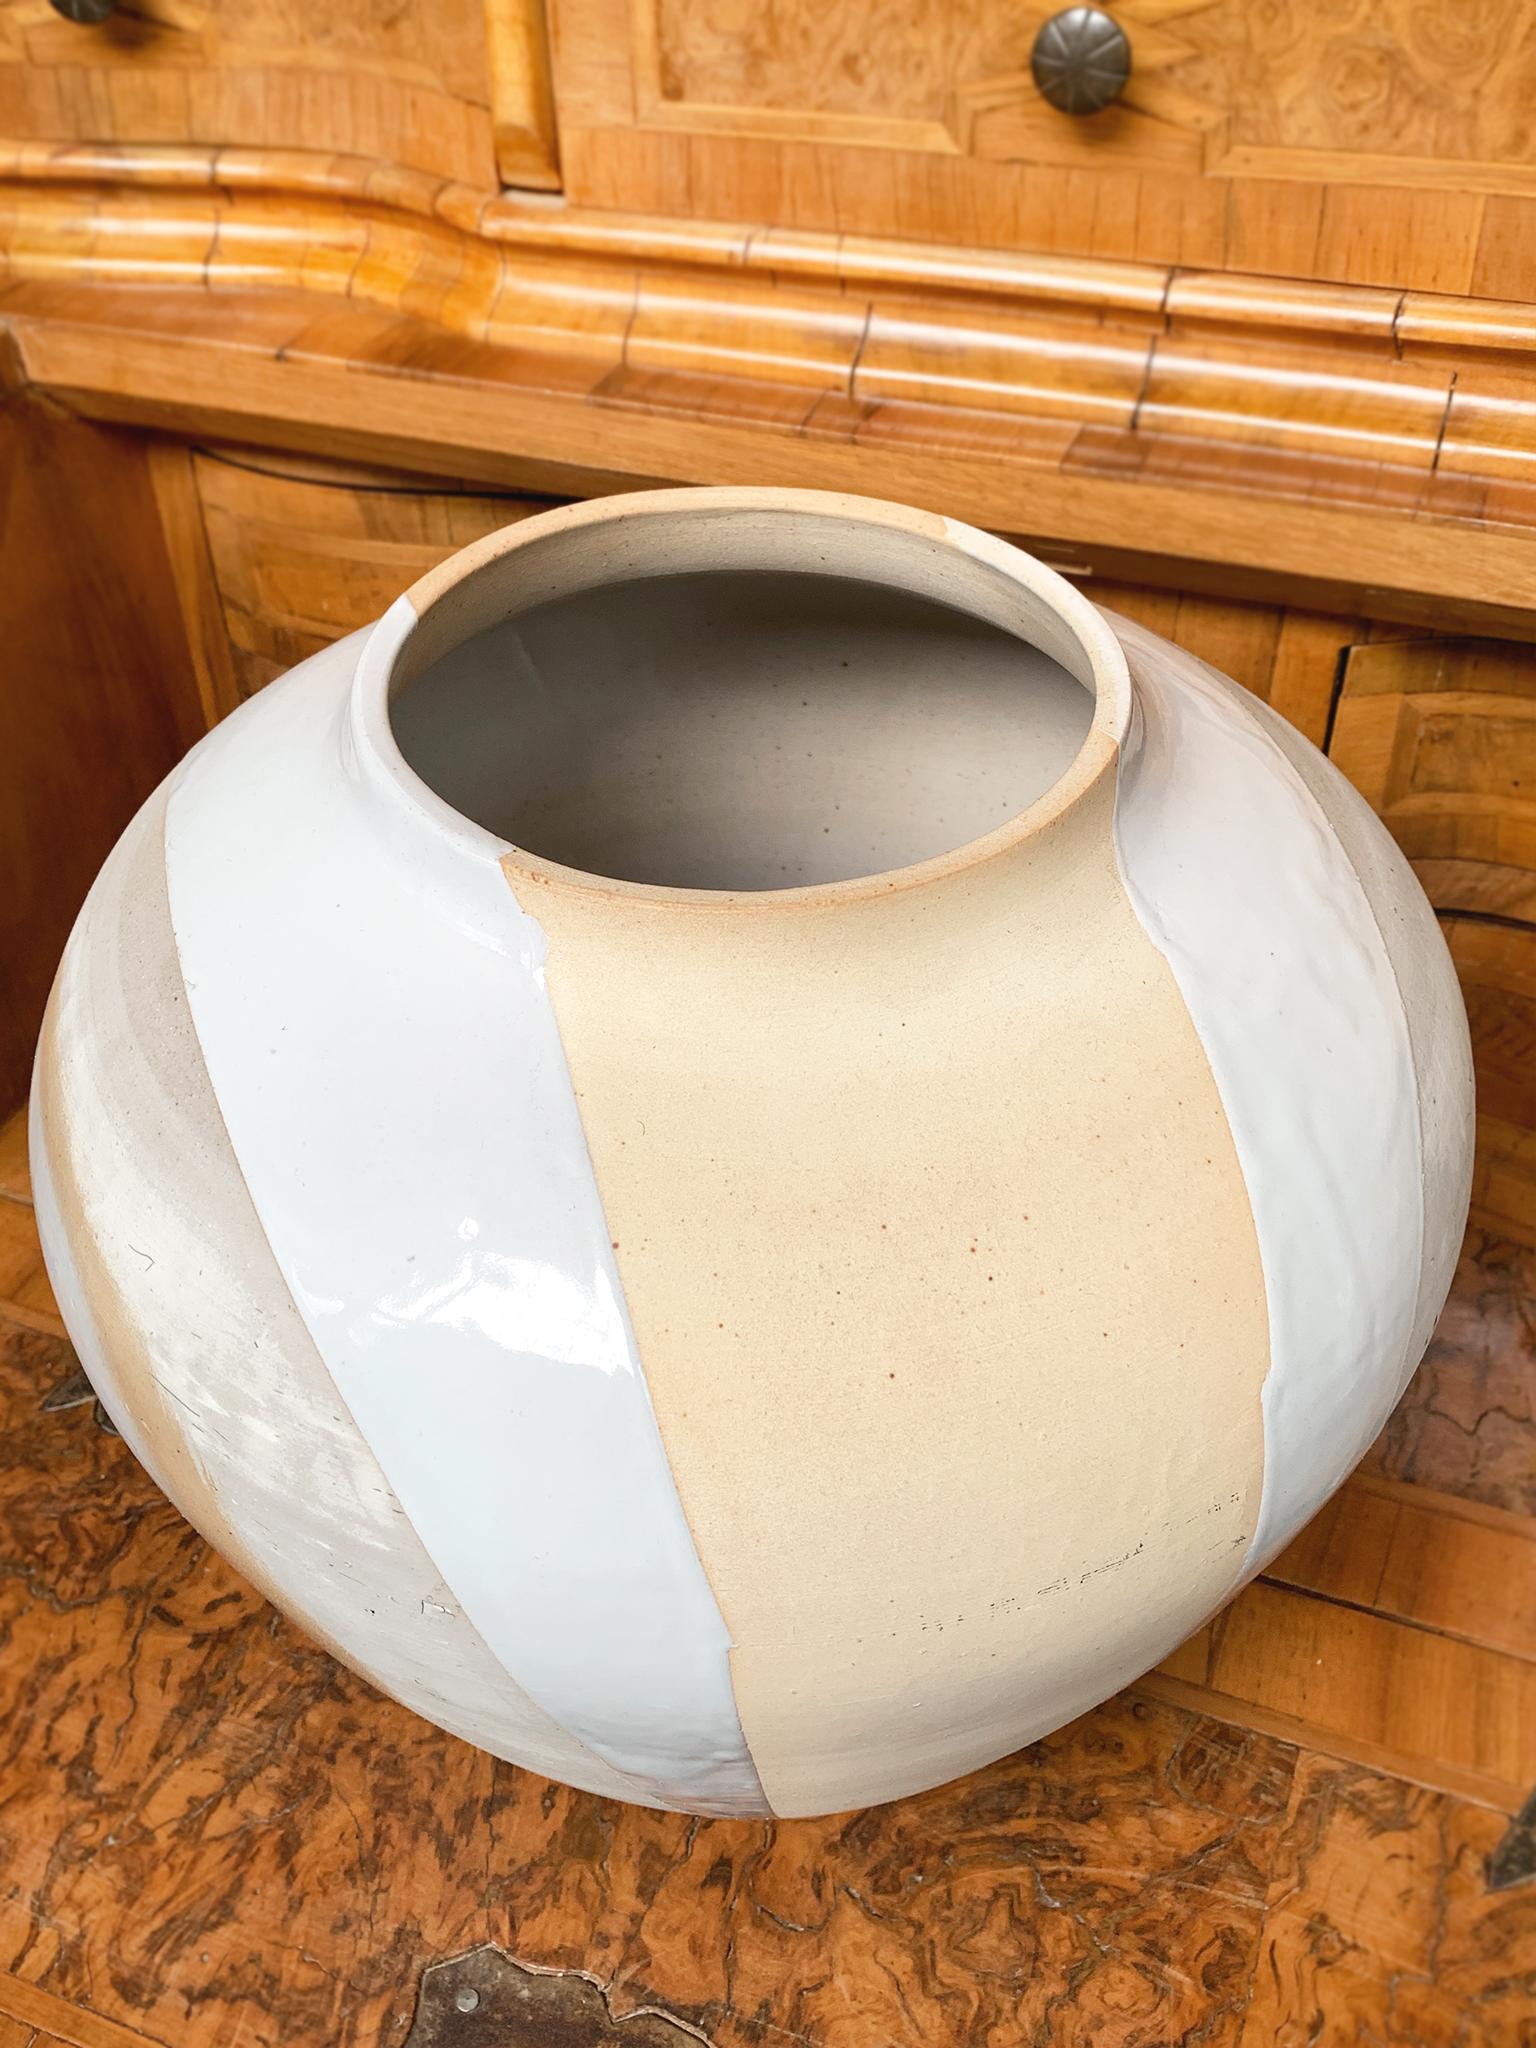 From a series of fashion-inspired ceramics by Thom Lussier, hand-crafted exclusively for Cafiero Select. Smooth glaze and matte, crackled finish create an evocative mix of textures and pastel hues composed like a couture, color-block dress! The